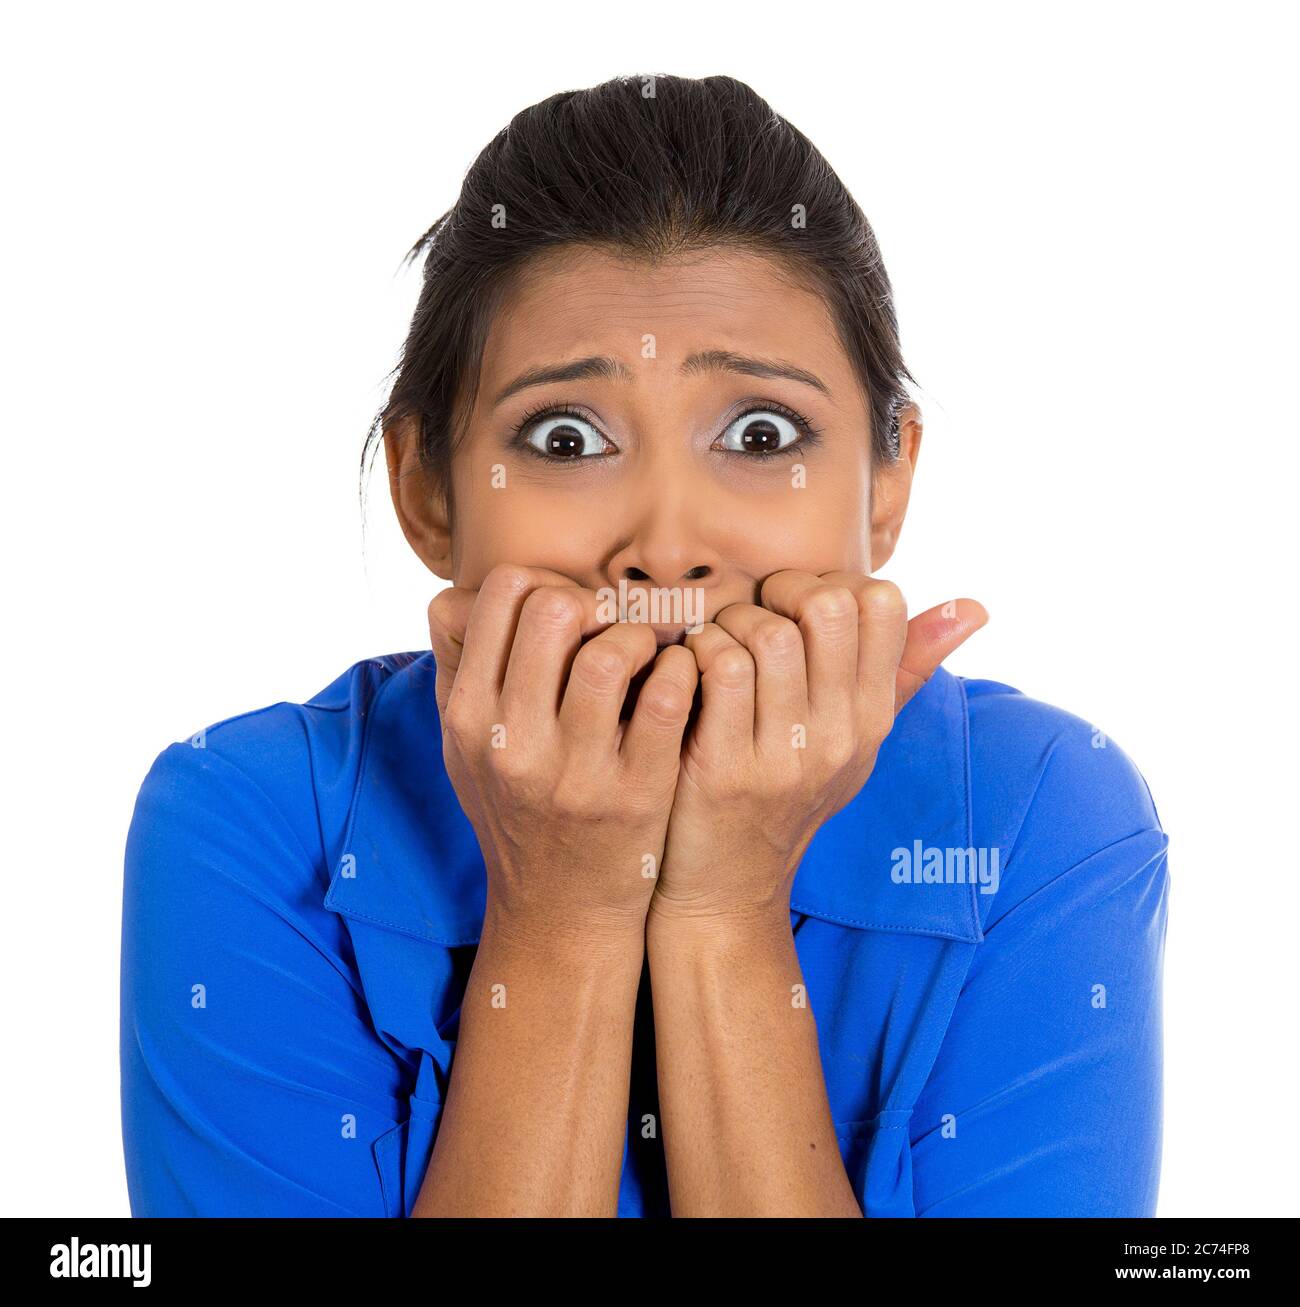 Portrait of a young woman biting her nails and looking anxious worried isolated on white background. Stock Photo